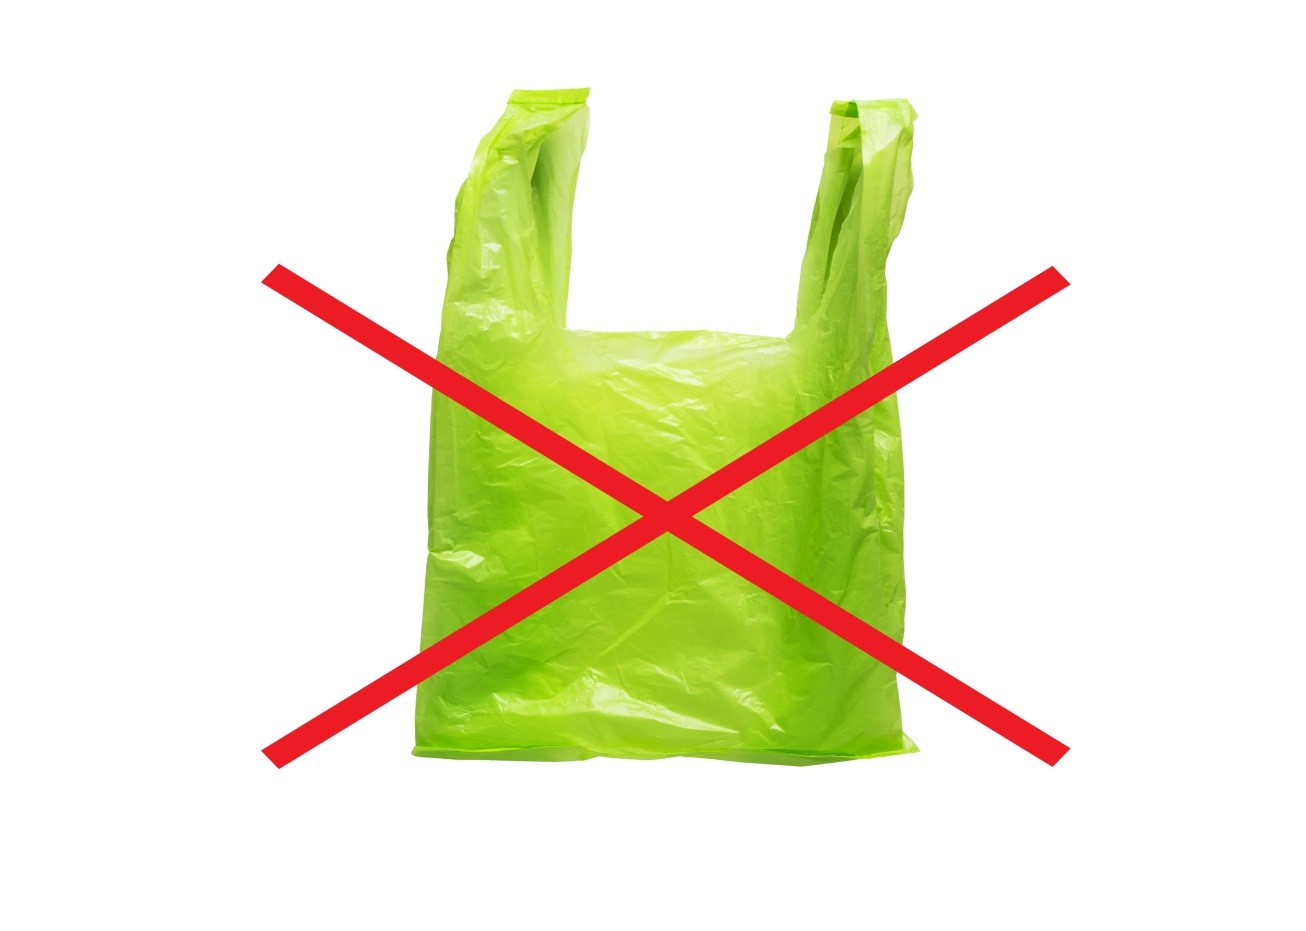 Kenya: Government Bans the Use of Plastic Bags